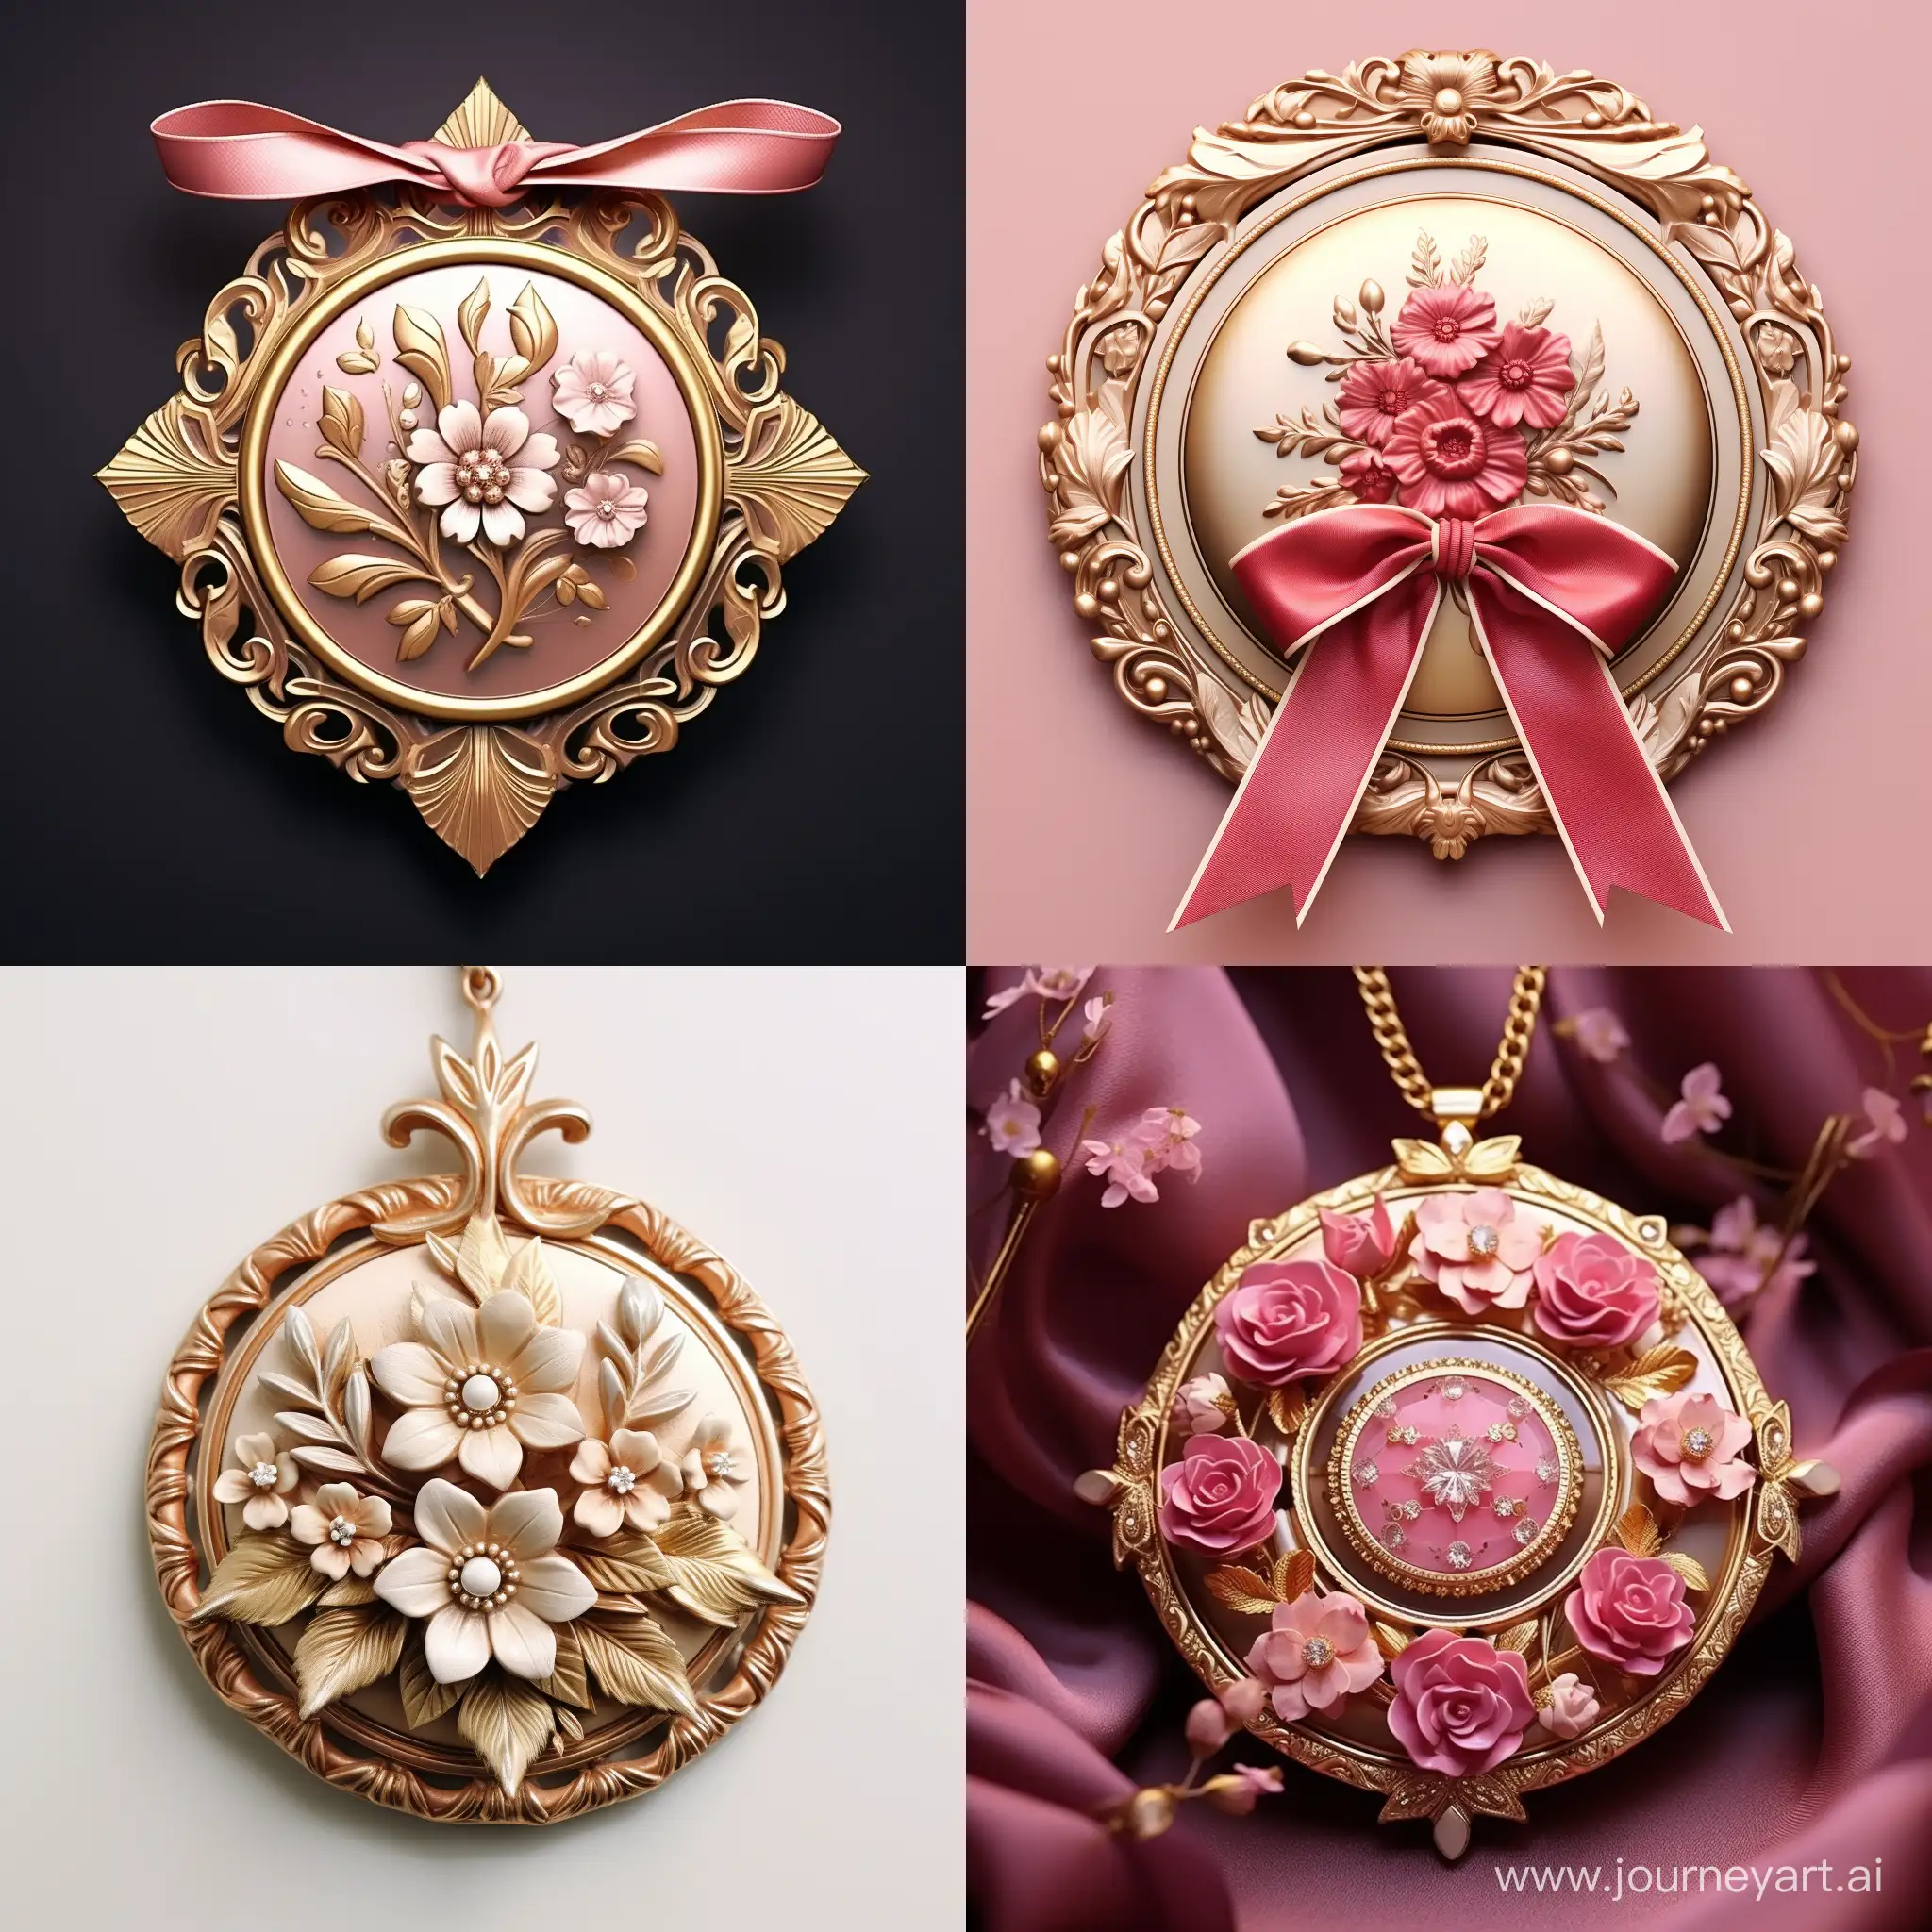 Elegant-Round-Medal-with-Small-Flower-Decoration-and-Central-Diamond